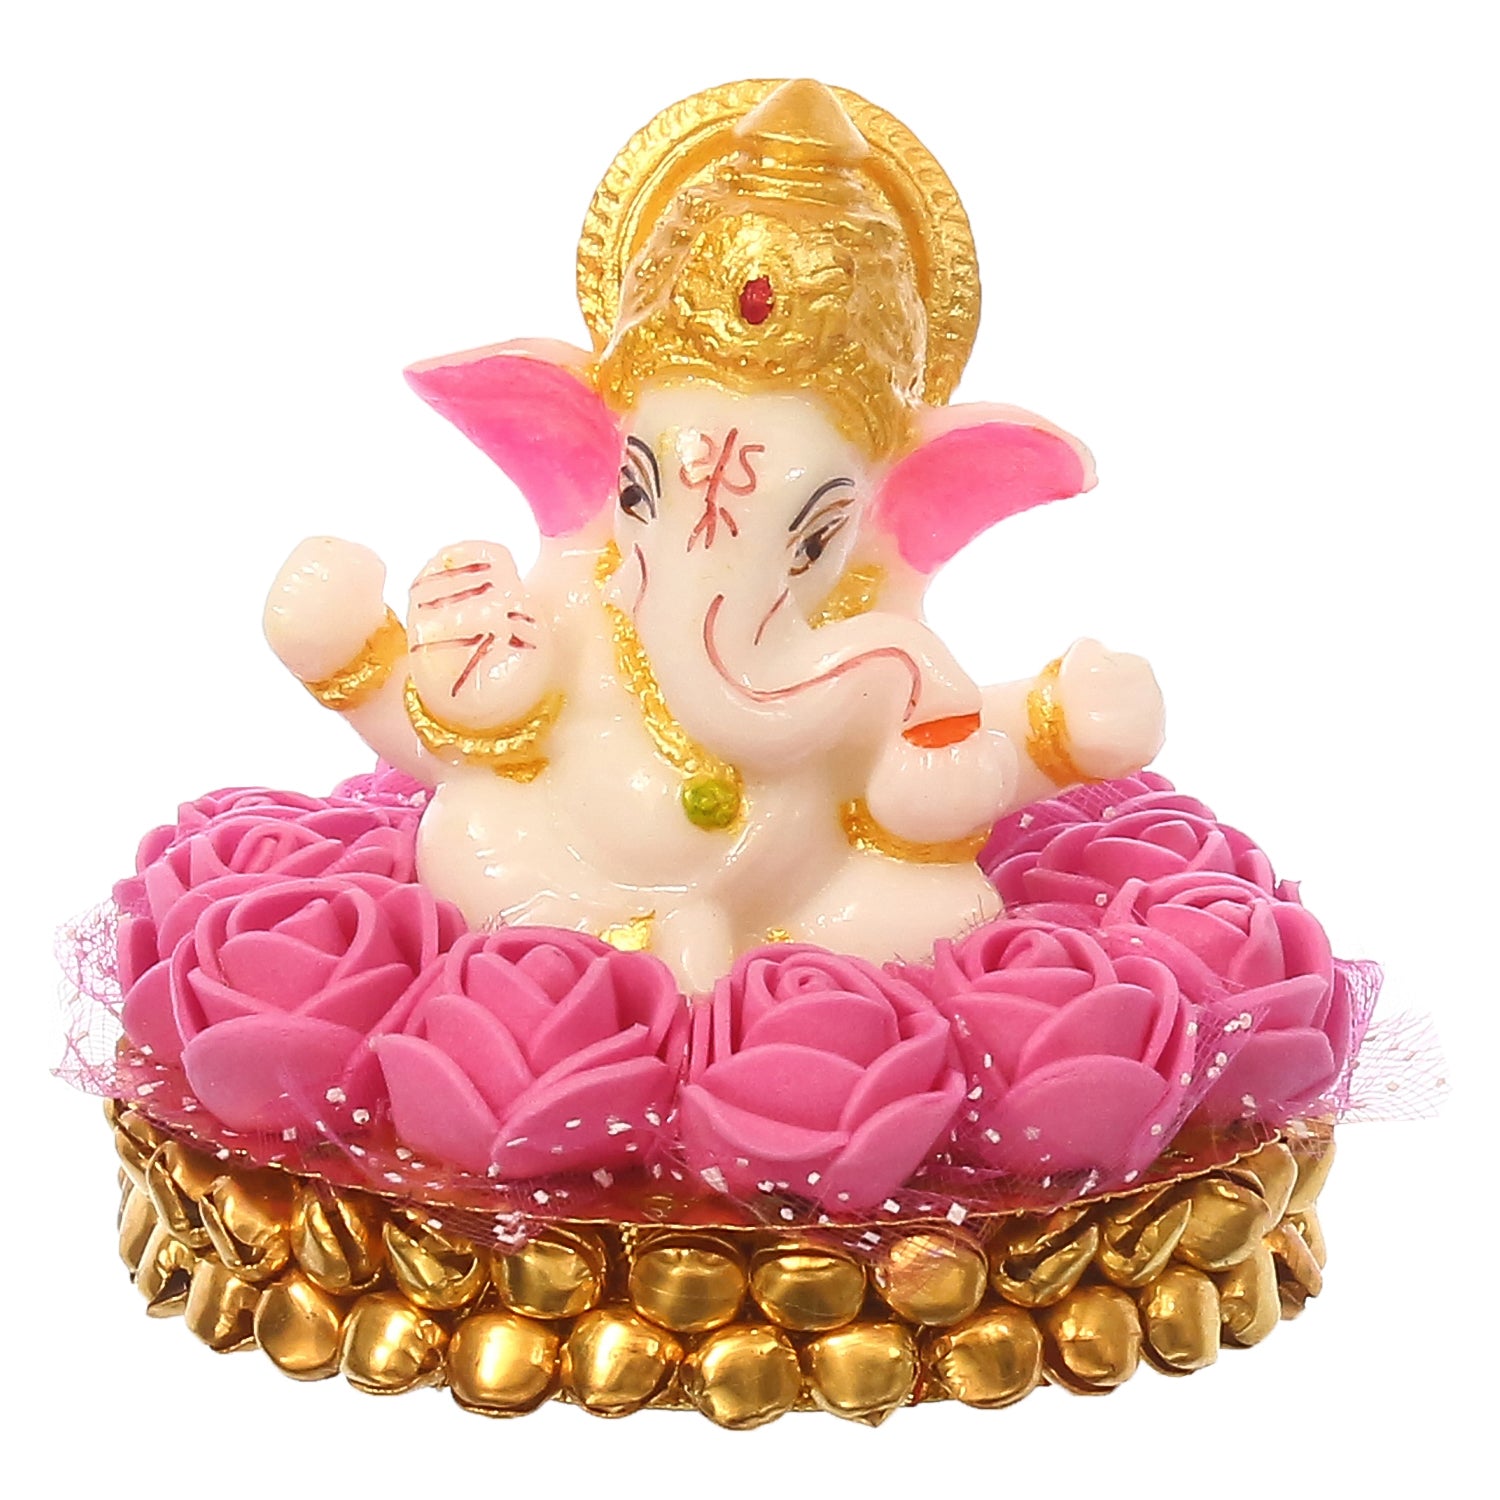 Polyresin Lord Ganesha Idol on Decorative Handcrafted Plate with Pink Flowers 2